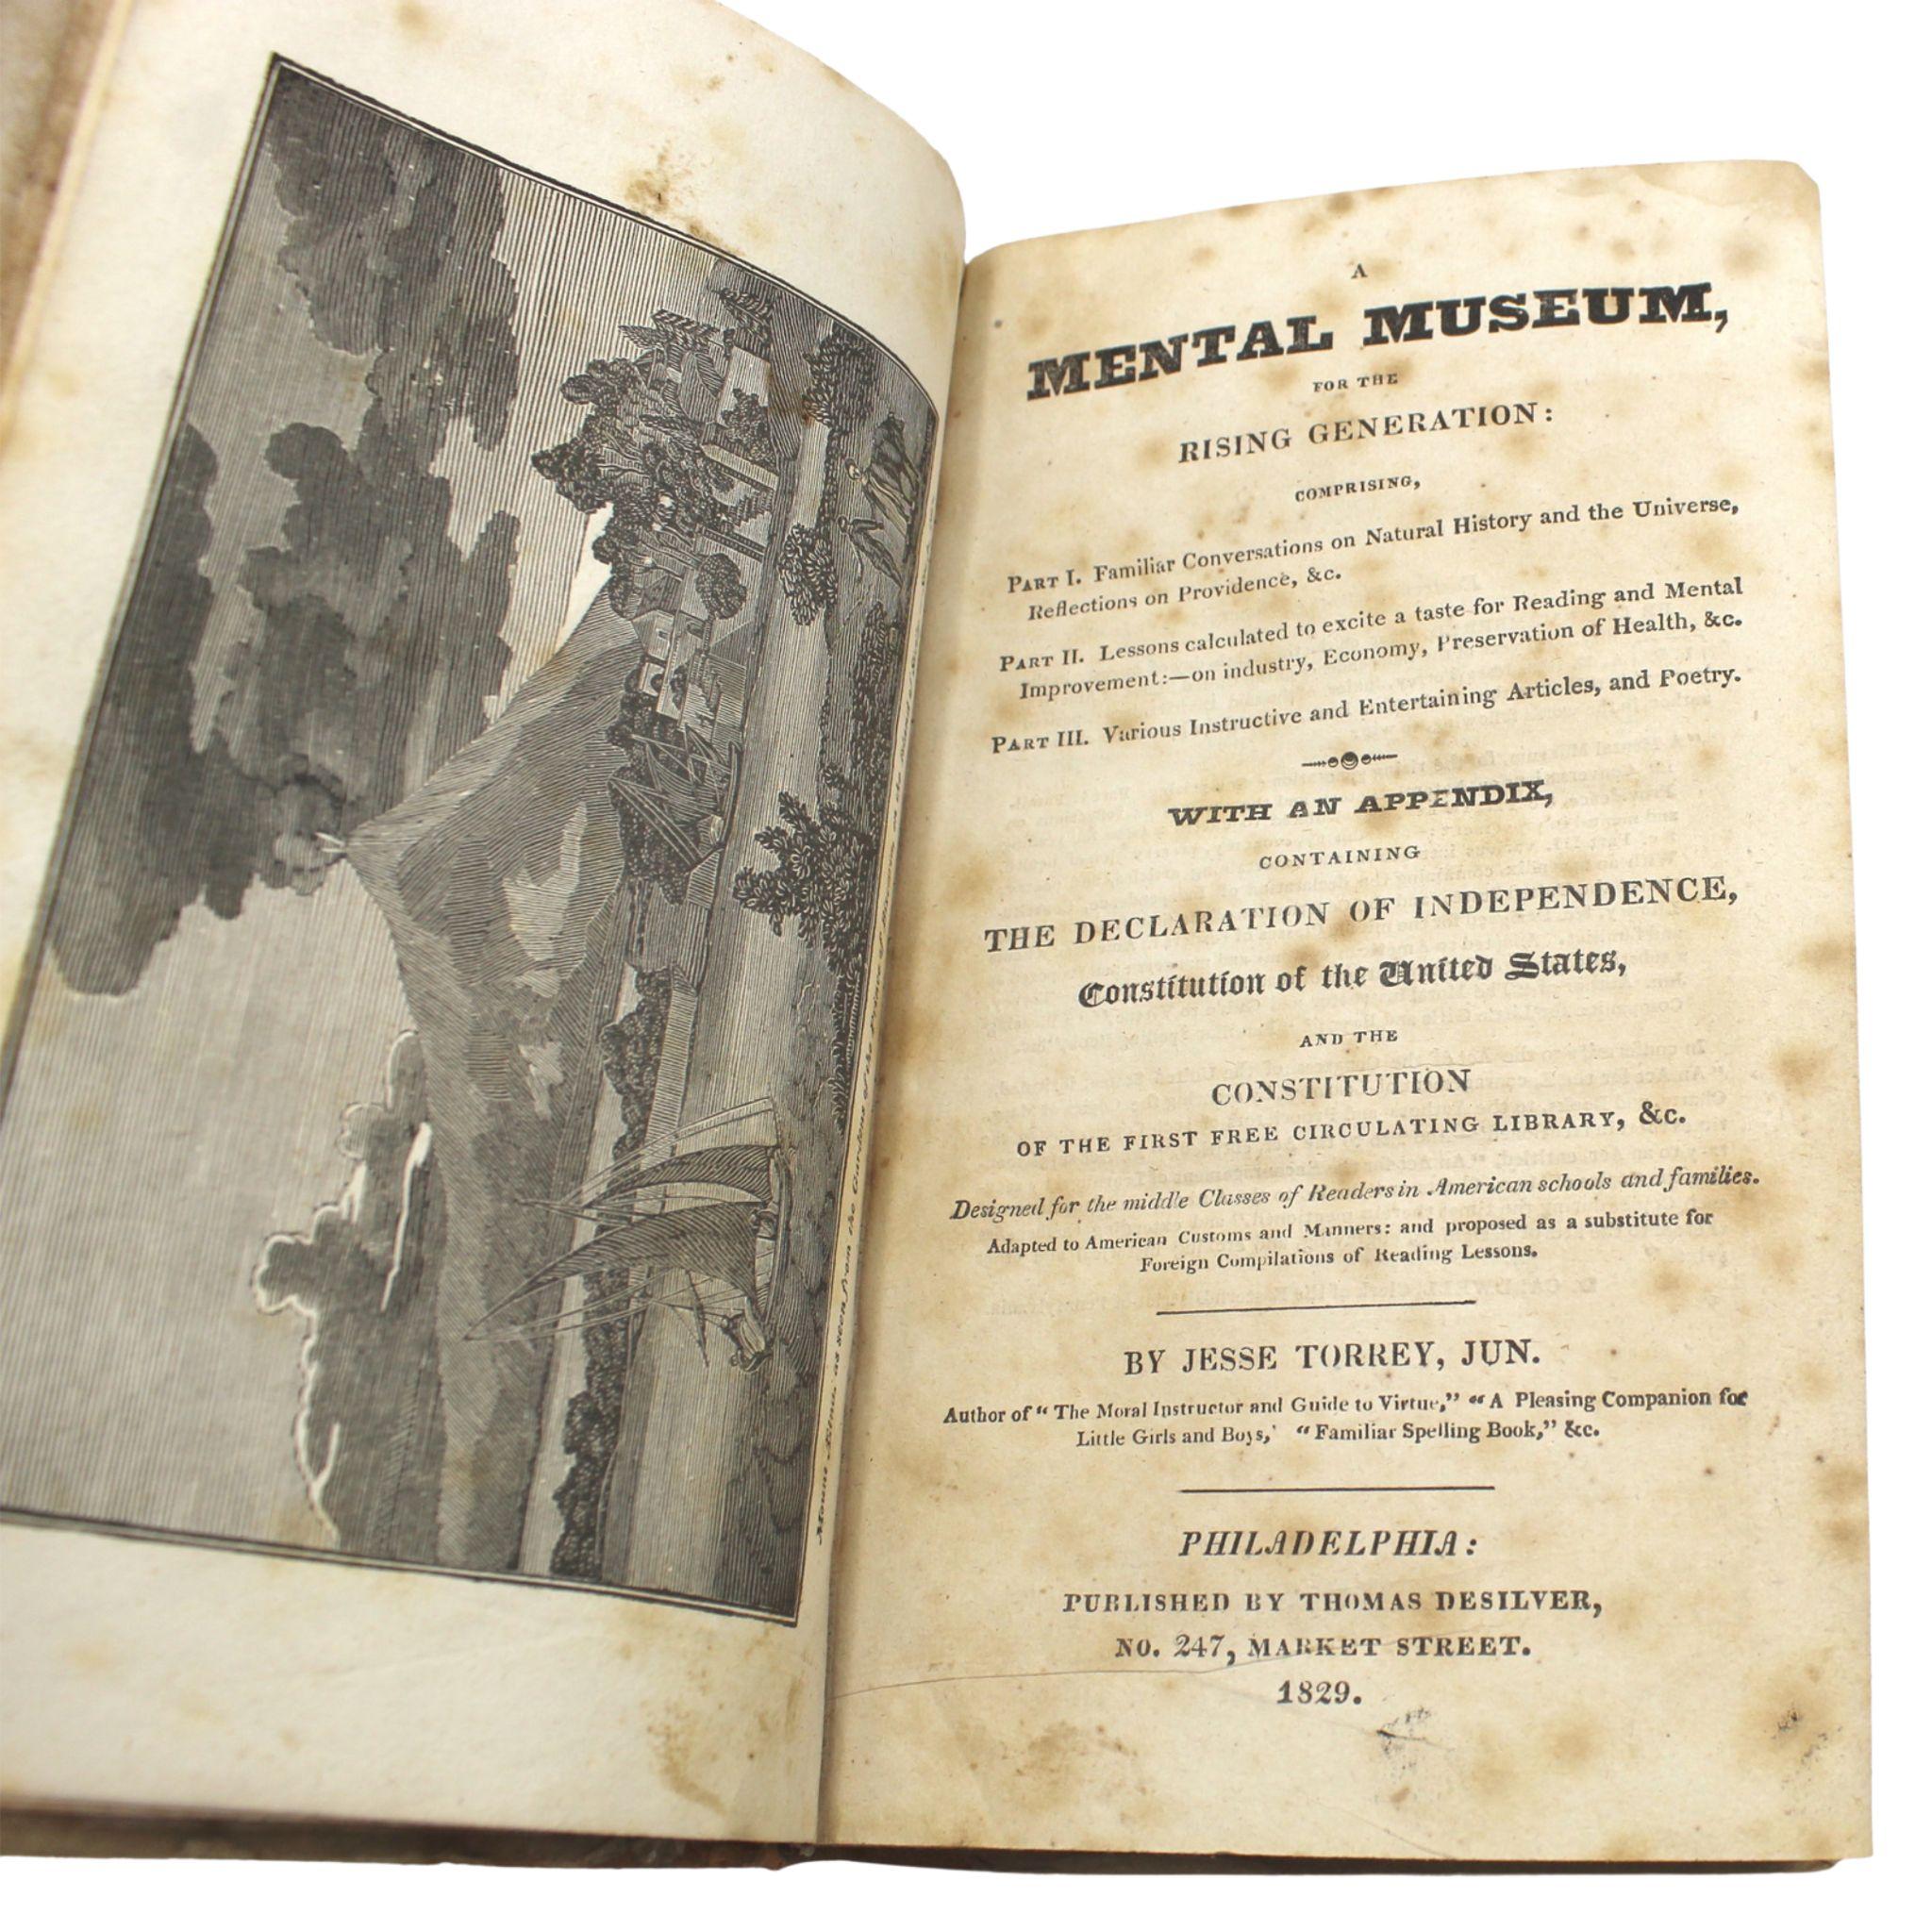 American Mental Museum for the Rising Generation, by Jesse Torrey Jr., 1829